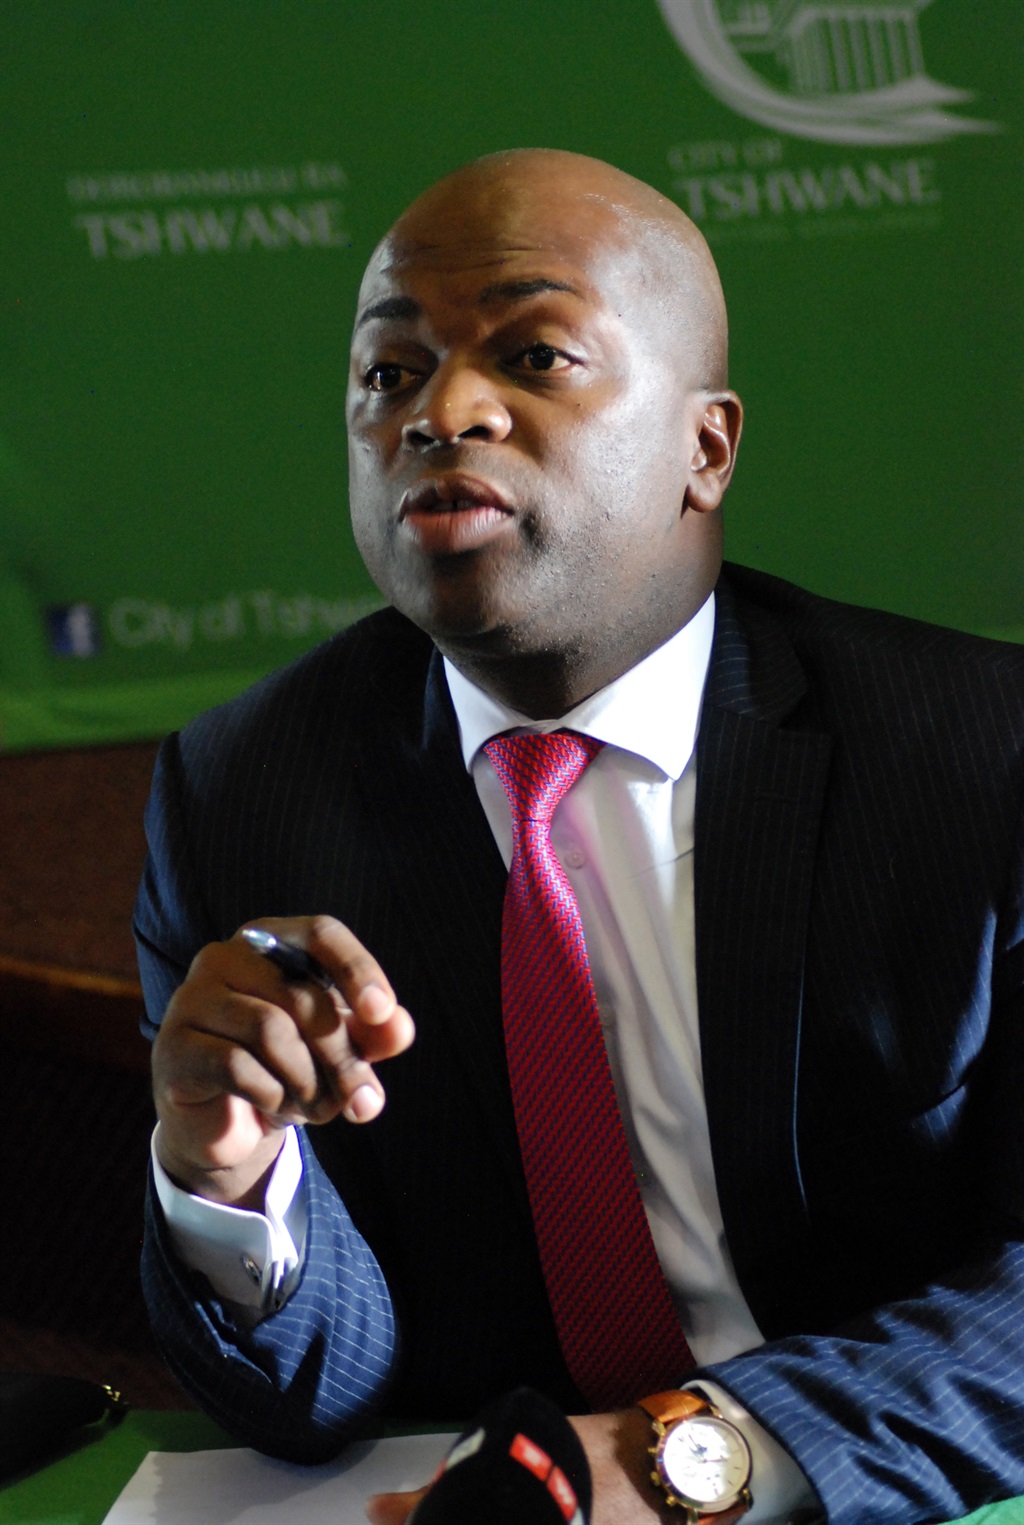 Tshwane Mayor Solly Msimanga has received major backlash after his controversial trip to Taiwan.  PICTURE: Samson Ratswana 